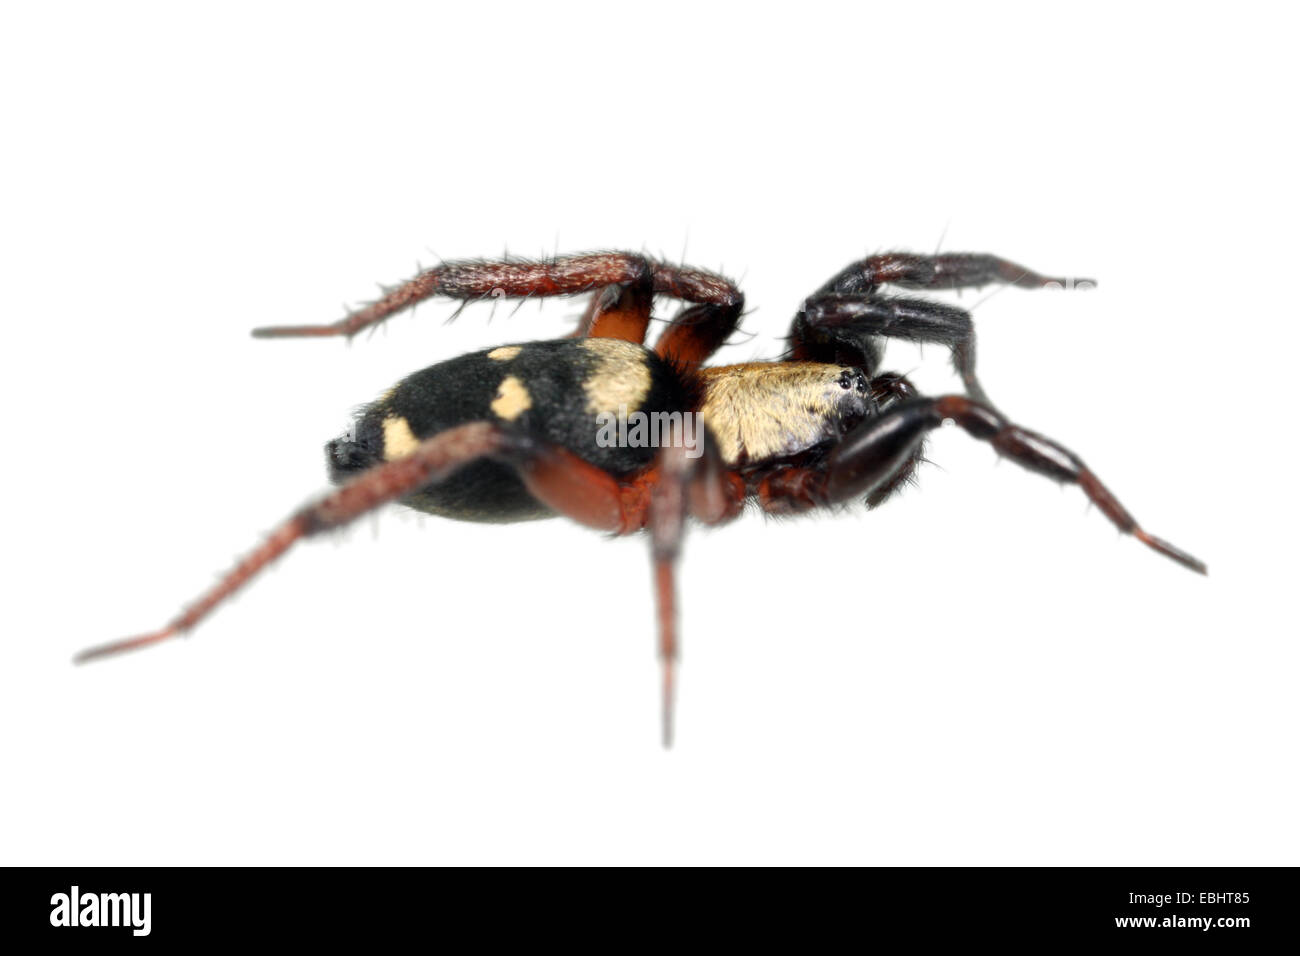 Female Callilepis nocturna spider on white background. Family Gnaphosidae, Ground spiders. Stock Photo